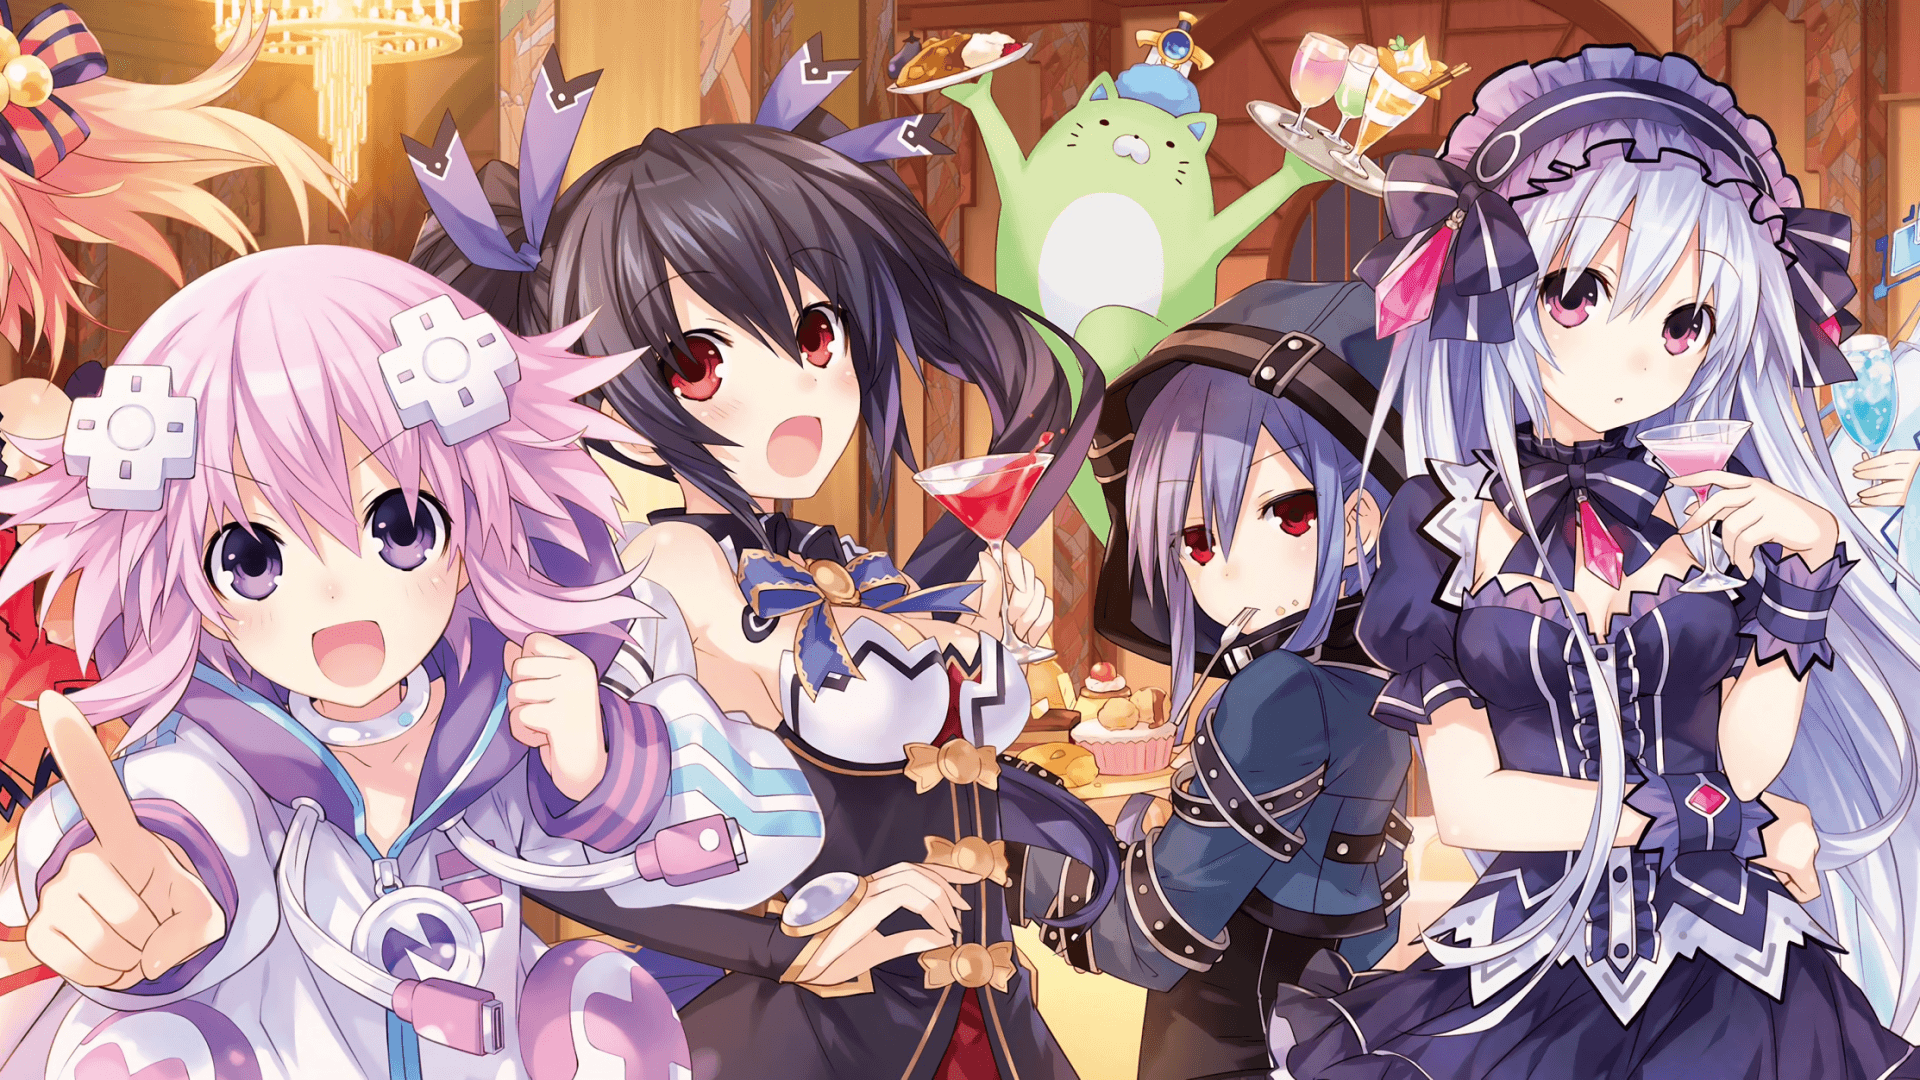 Hyperdimension Neptunia Anime Wallpapers Wallpaper Cave Images, Photos, Reviews